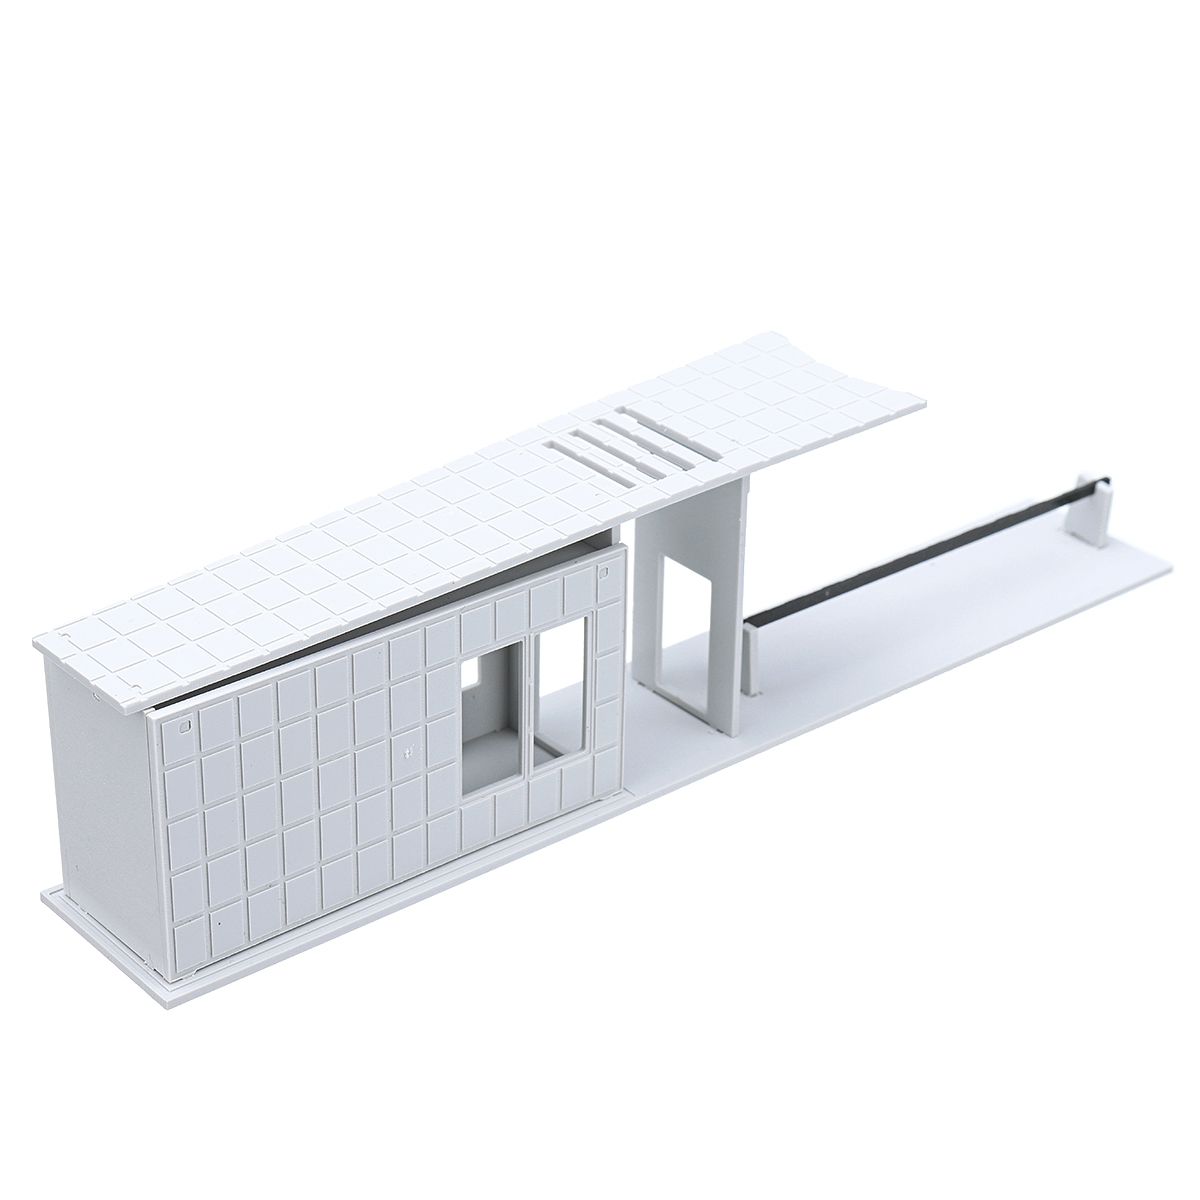 HO-Scale-187-Community-Factory-Entrance-Guard-Security-Room-Building-Model-1541359